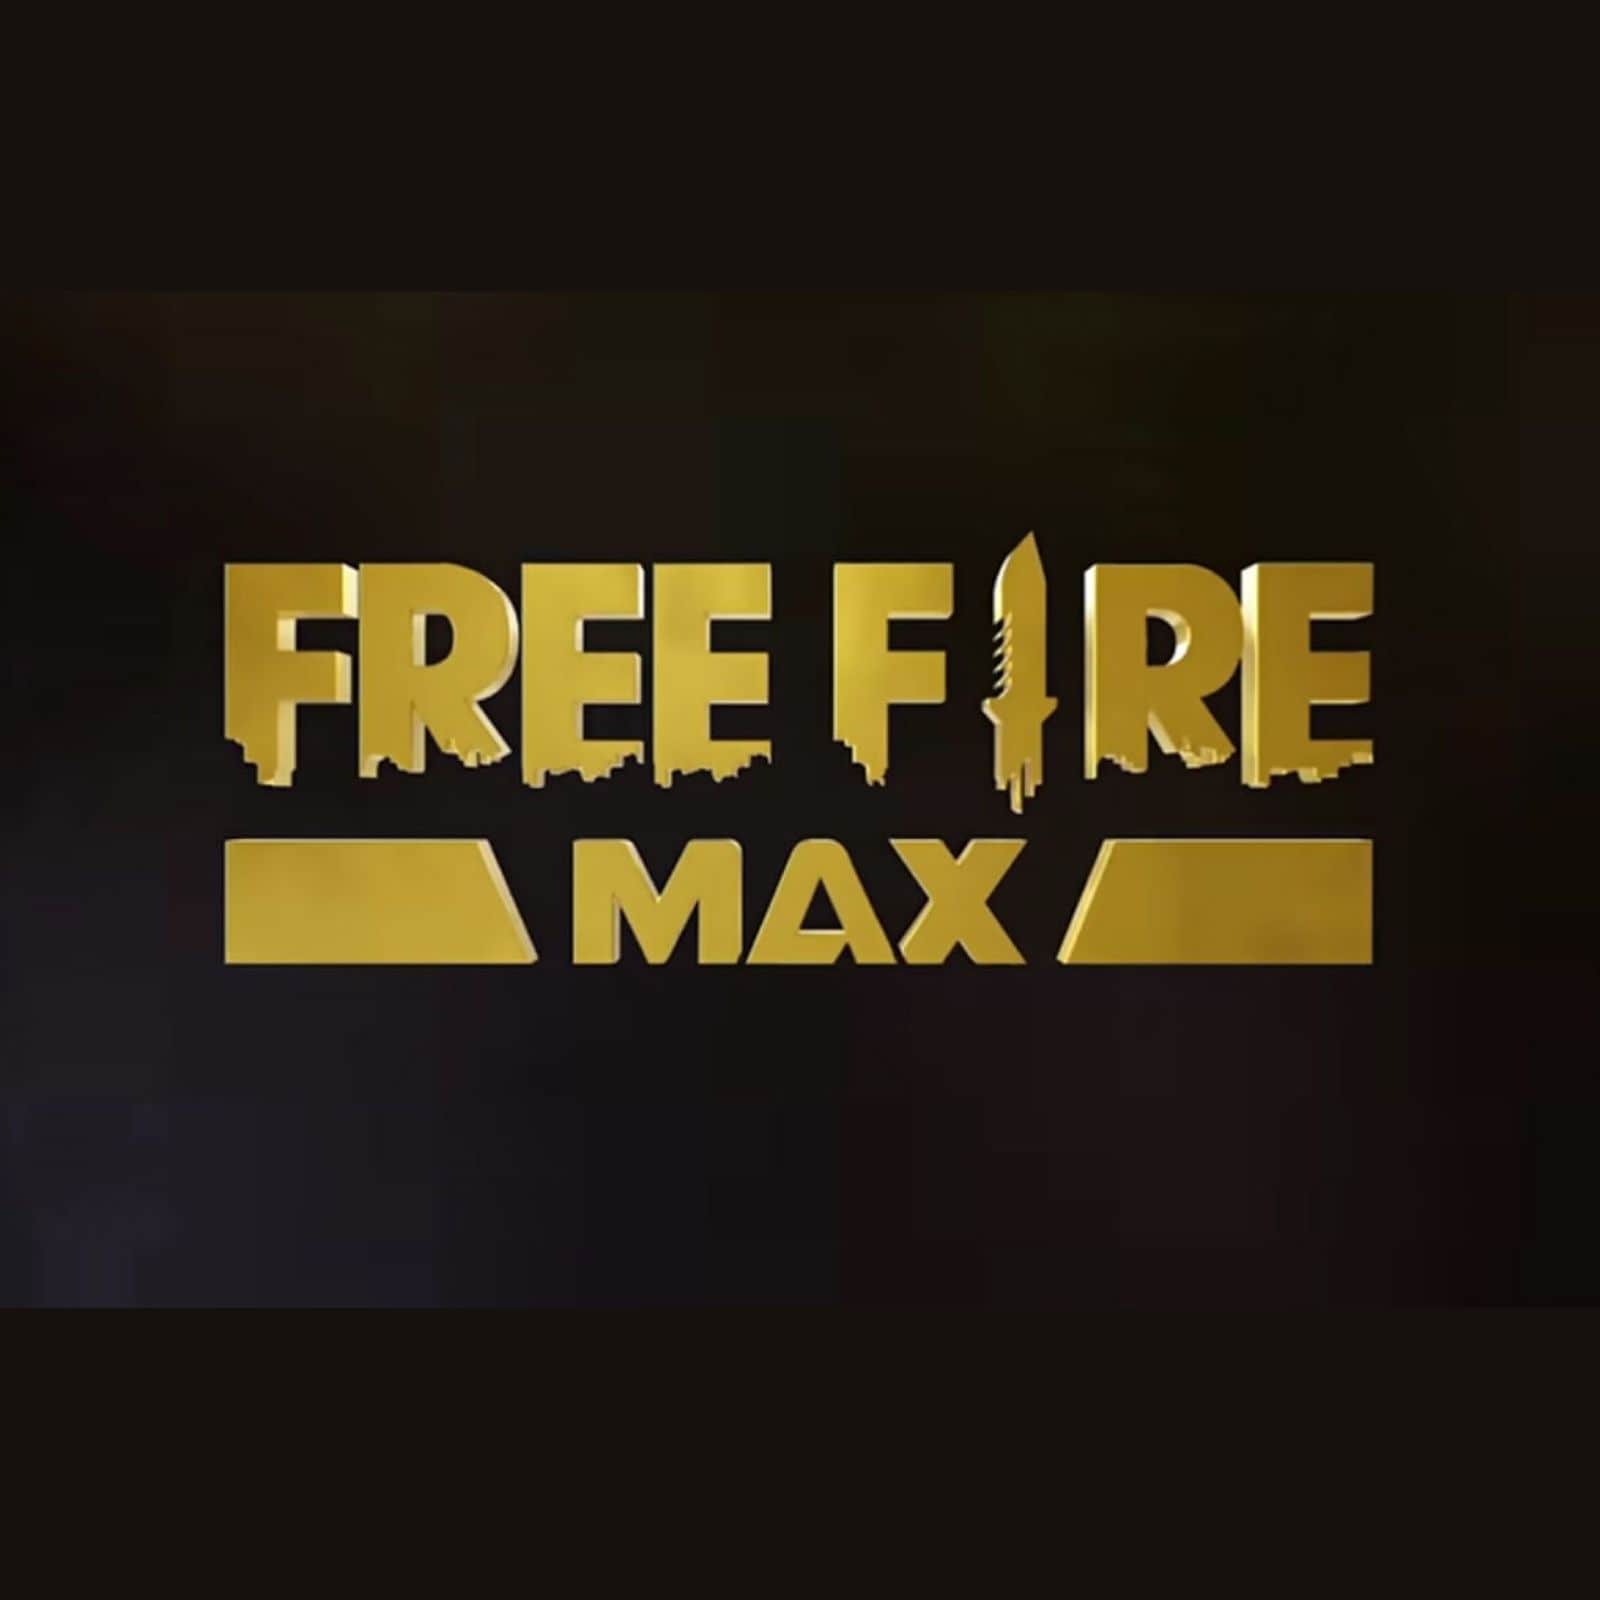 Garena Free Fire MAX diamonds too costly? Get them for FREE with these 3  apps